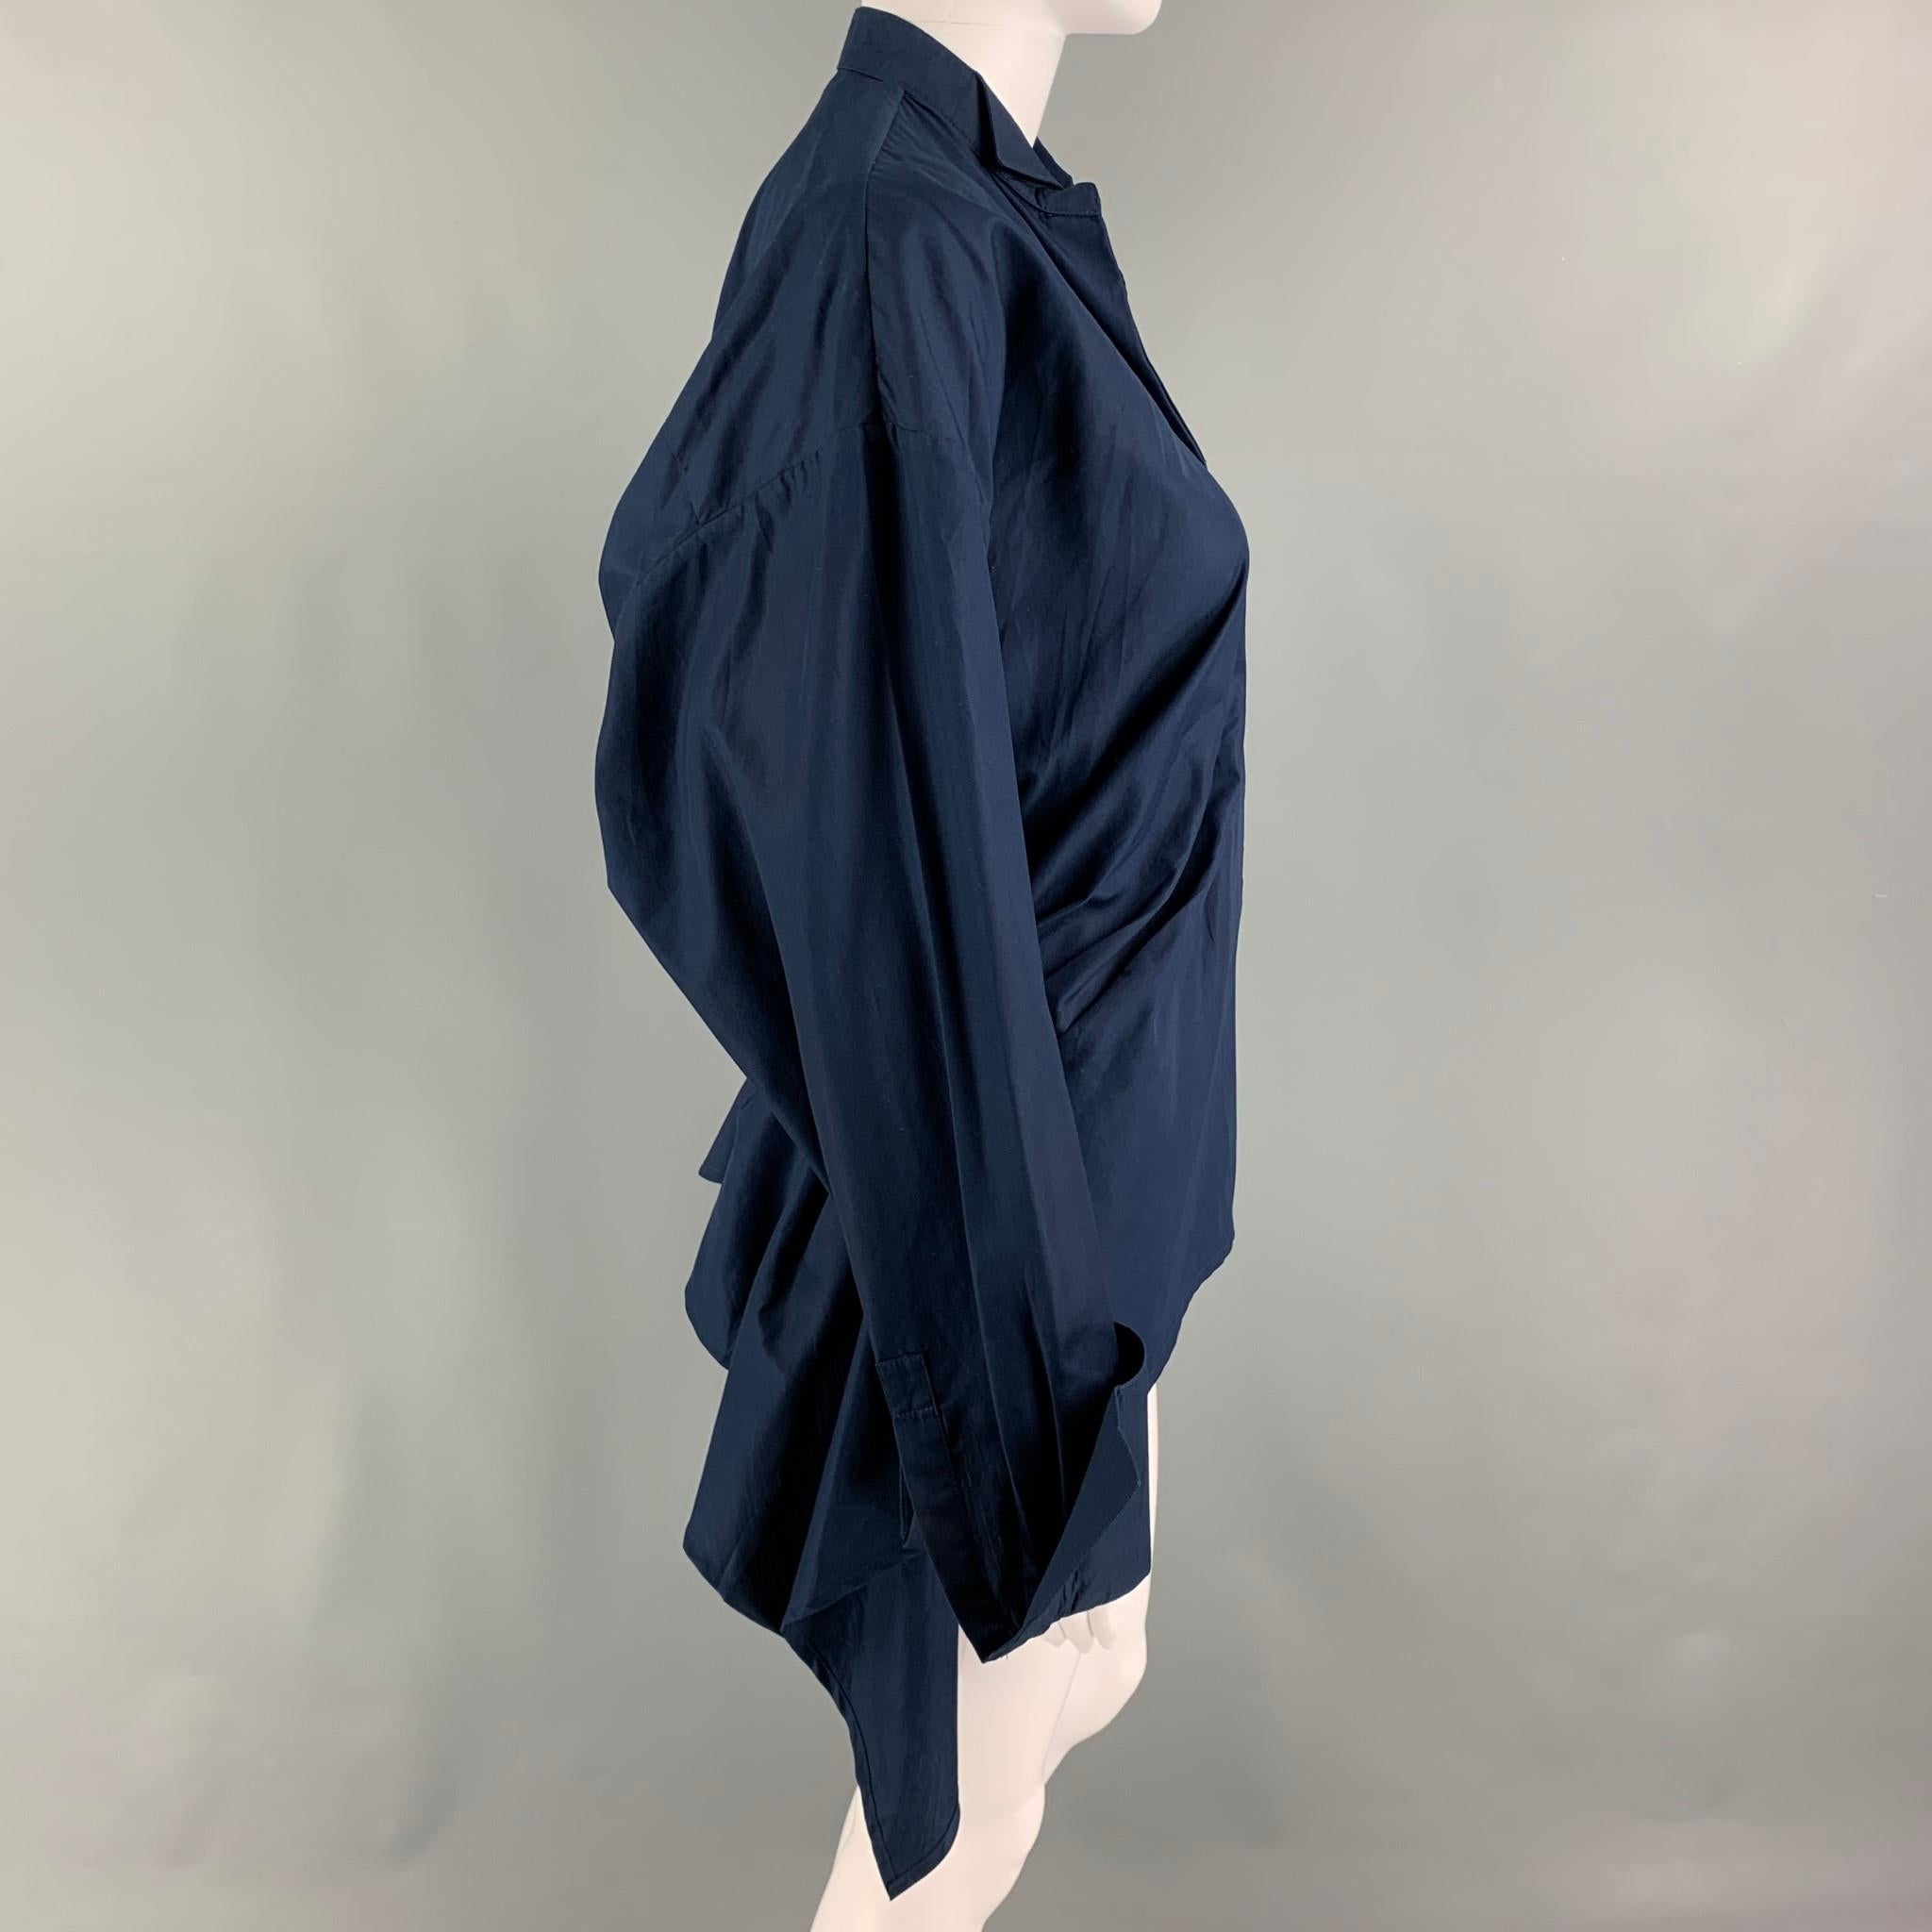 HAIDER ACKERMANN top comes in a navy cotton featuring a peplum design, pleated details, long sleeves, and a hidden placket closure. Made in Belgium.

Excellent Pre-Owned Condition.
Marked: Size tag removed.

Measurements:

Shoulder: 20 in.
Bust: 30